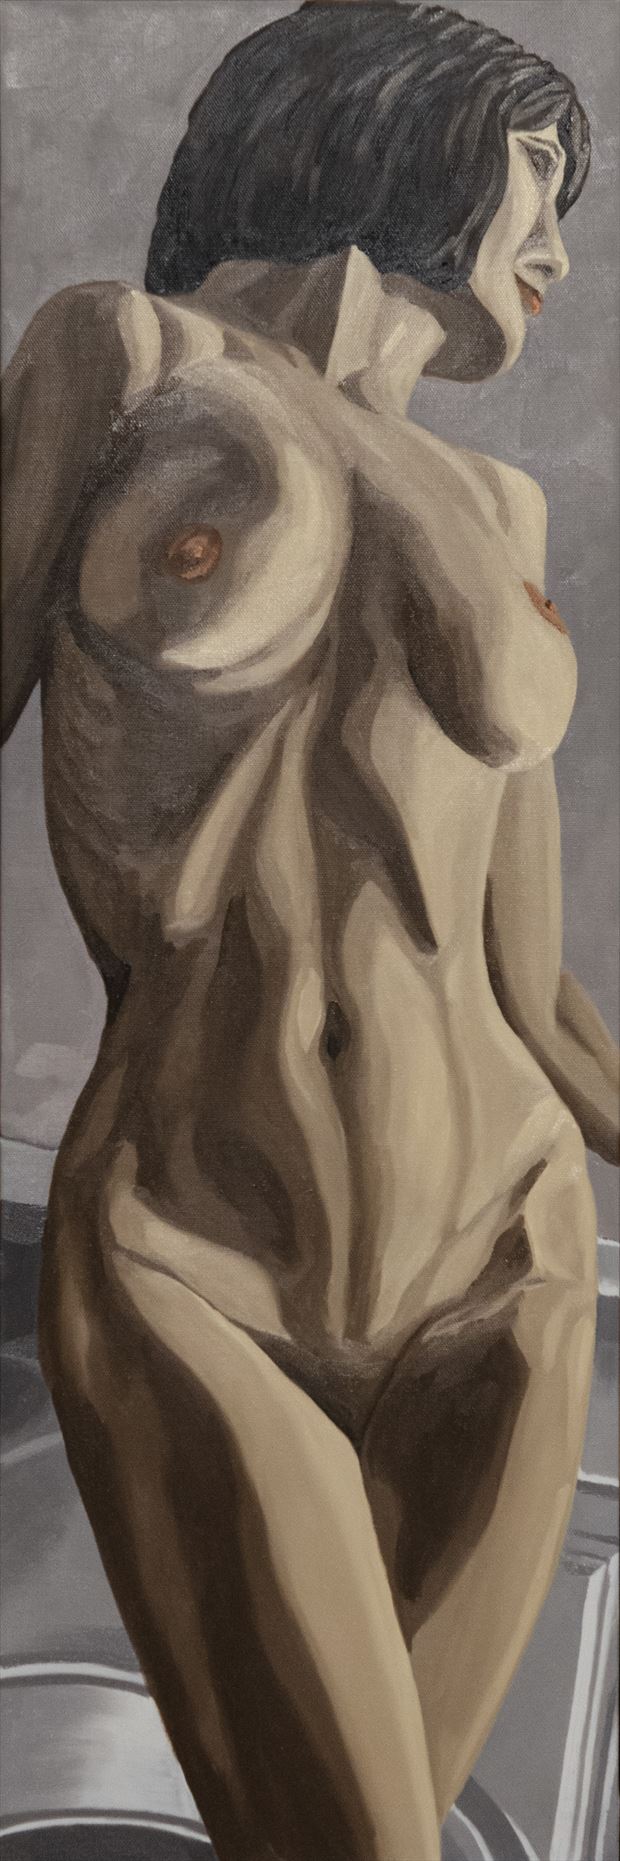 lady at the hearth figure study artwork by photographer alan h bruce